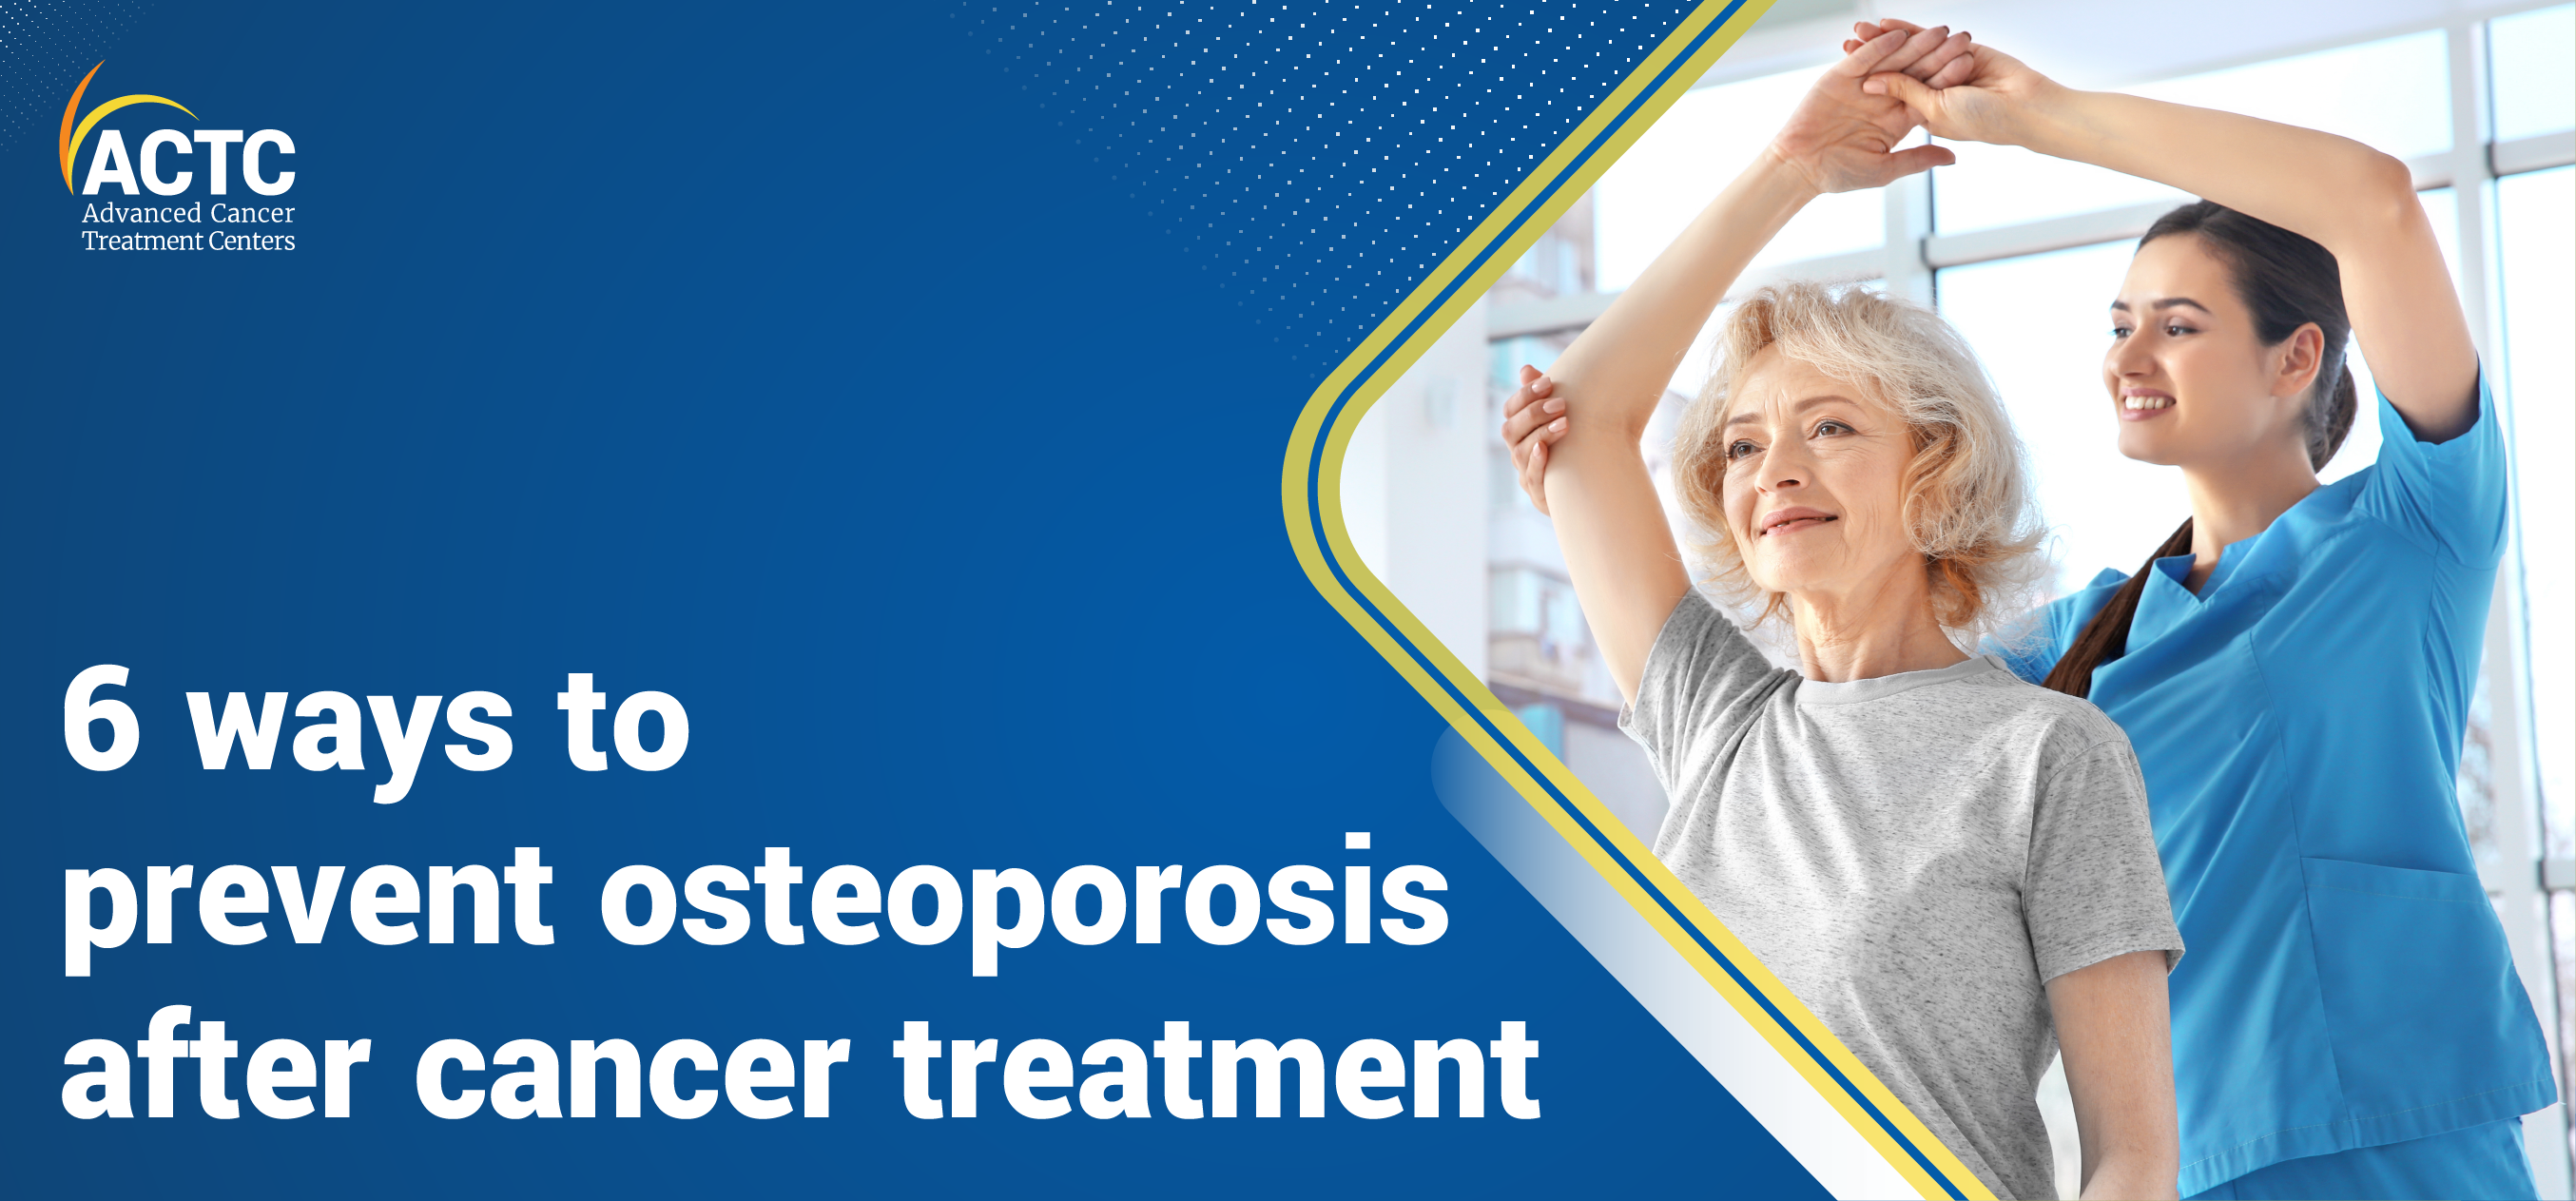 6 Ways To Prevent Osteoporosis After Cancer Treatment | ACTC